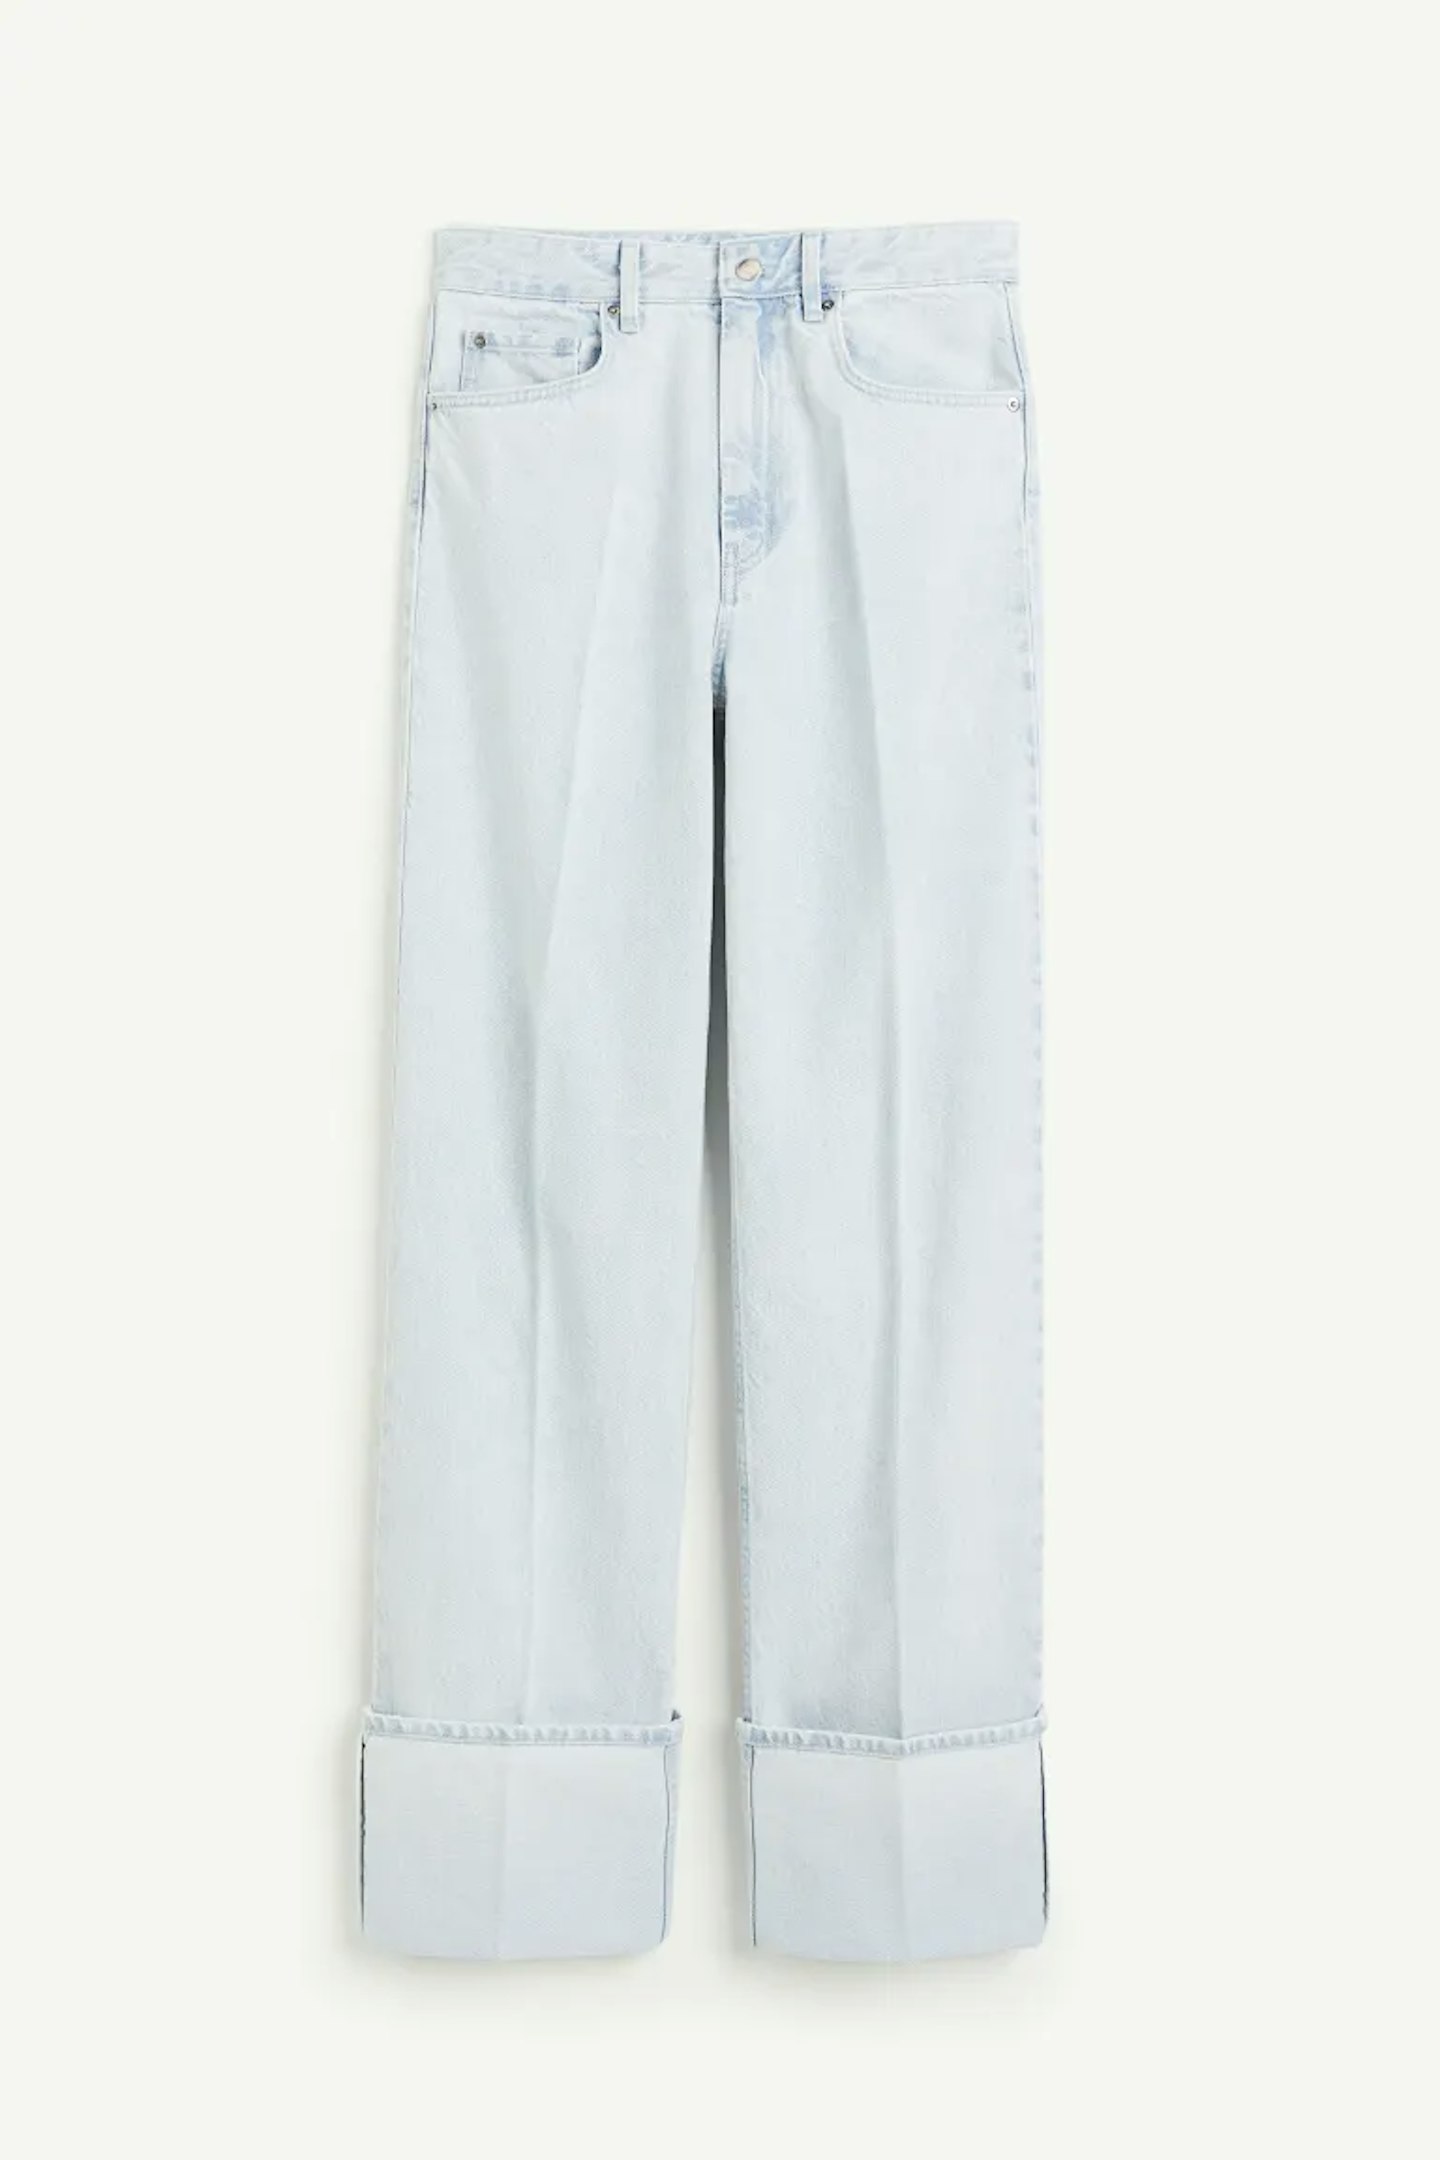 H&M, Straight High Fold-up Jeans